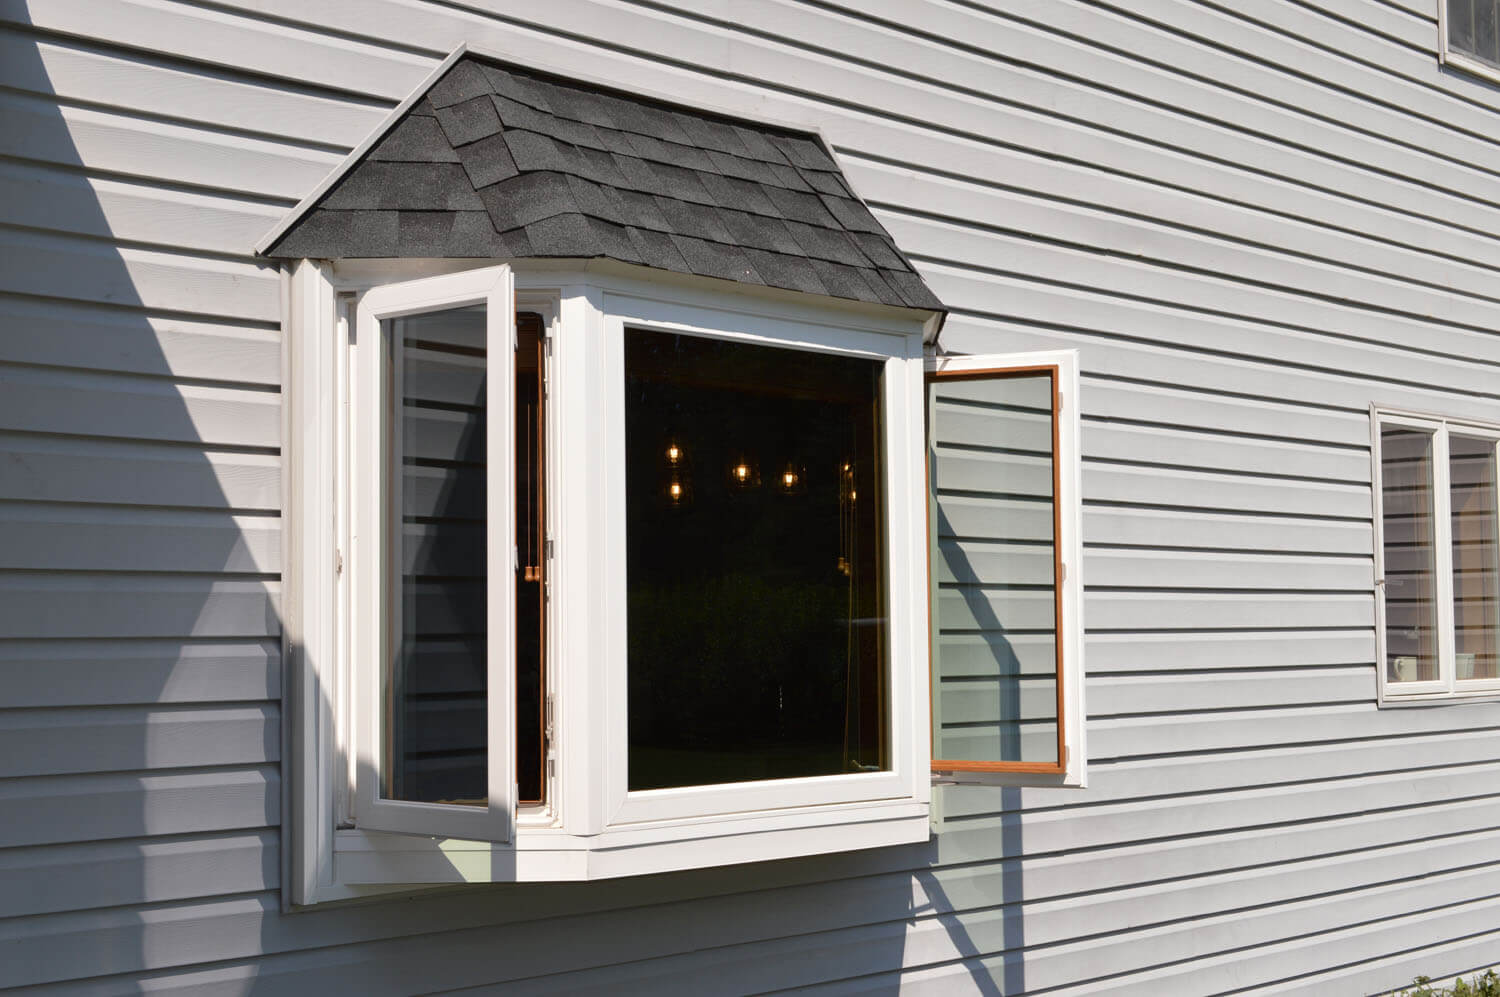 Exterior view of a bay window with the sides open